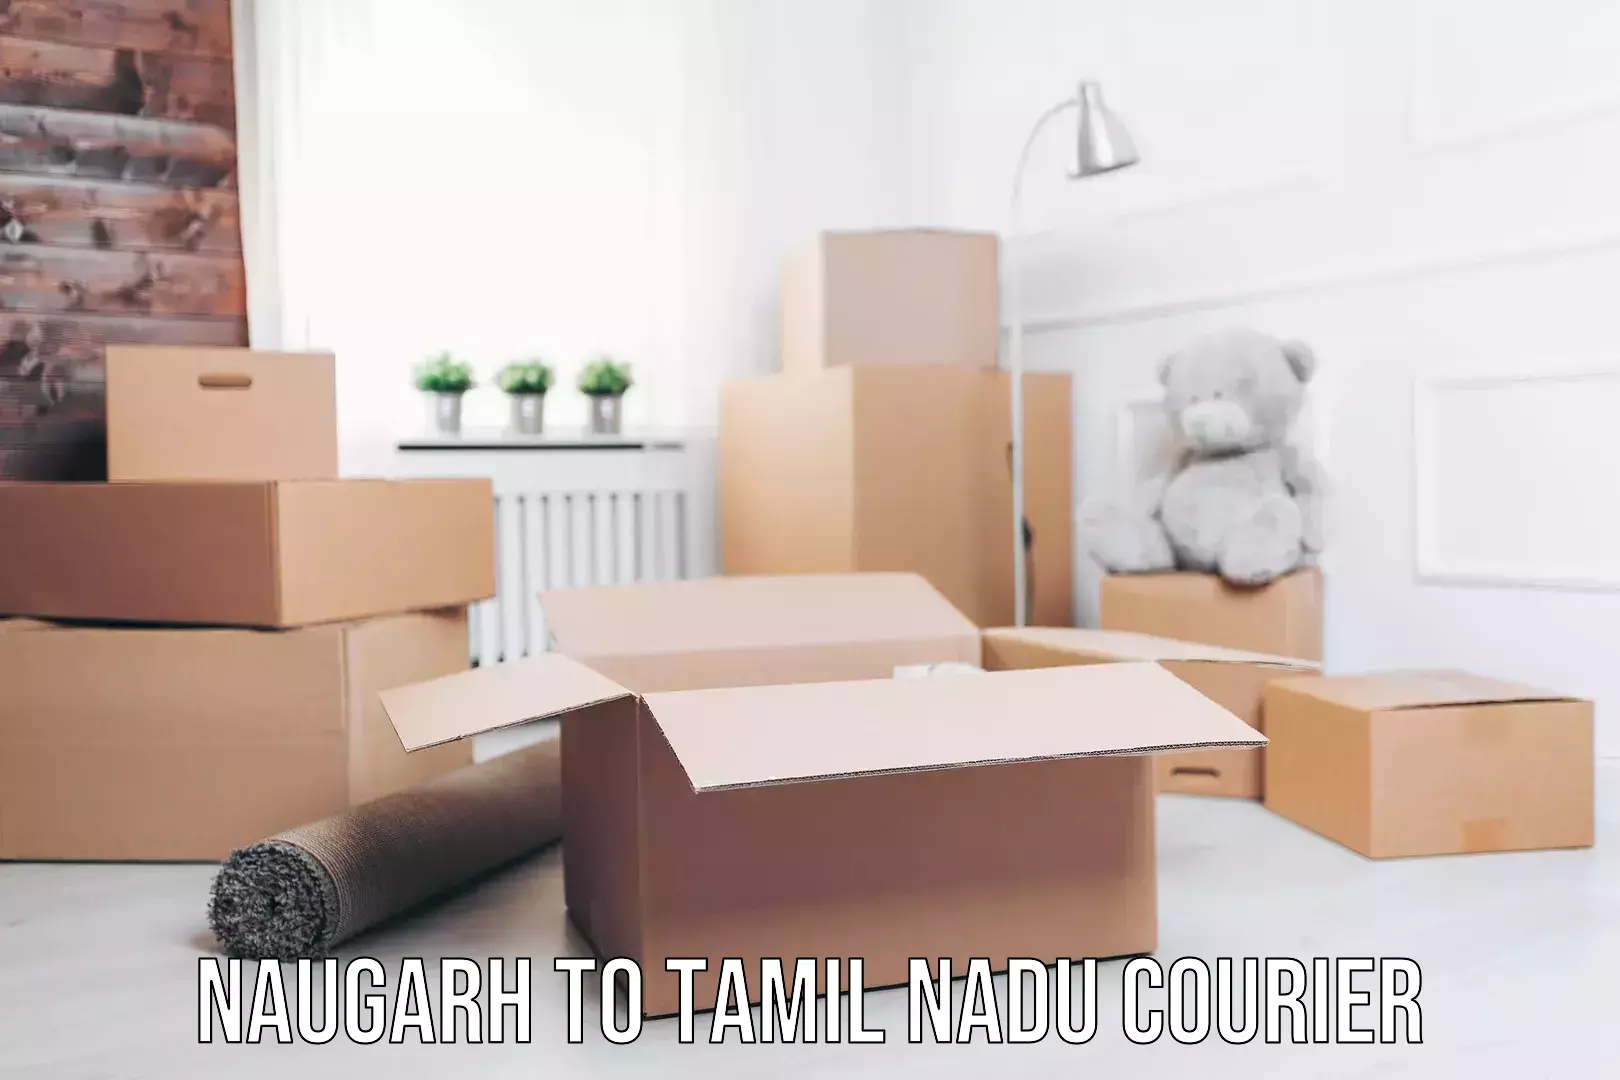 Nationwide household movers Naugarh to Tamil Nadu